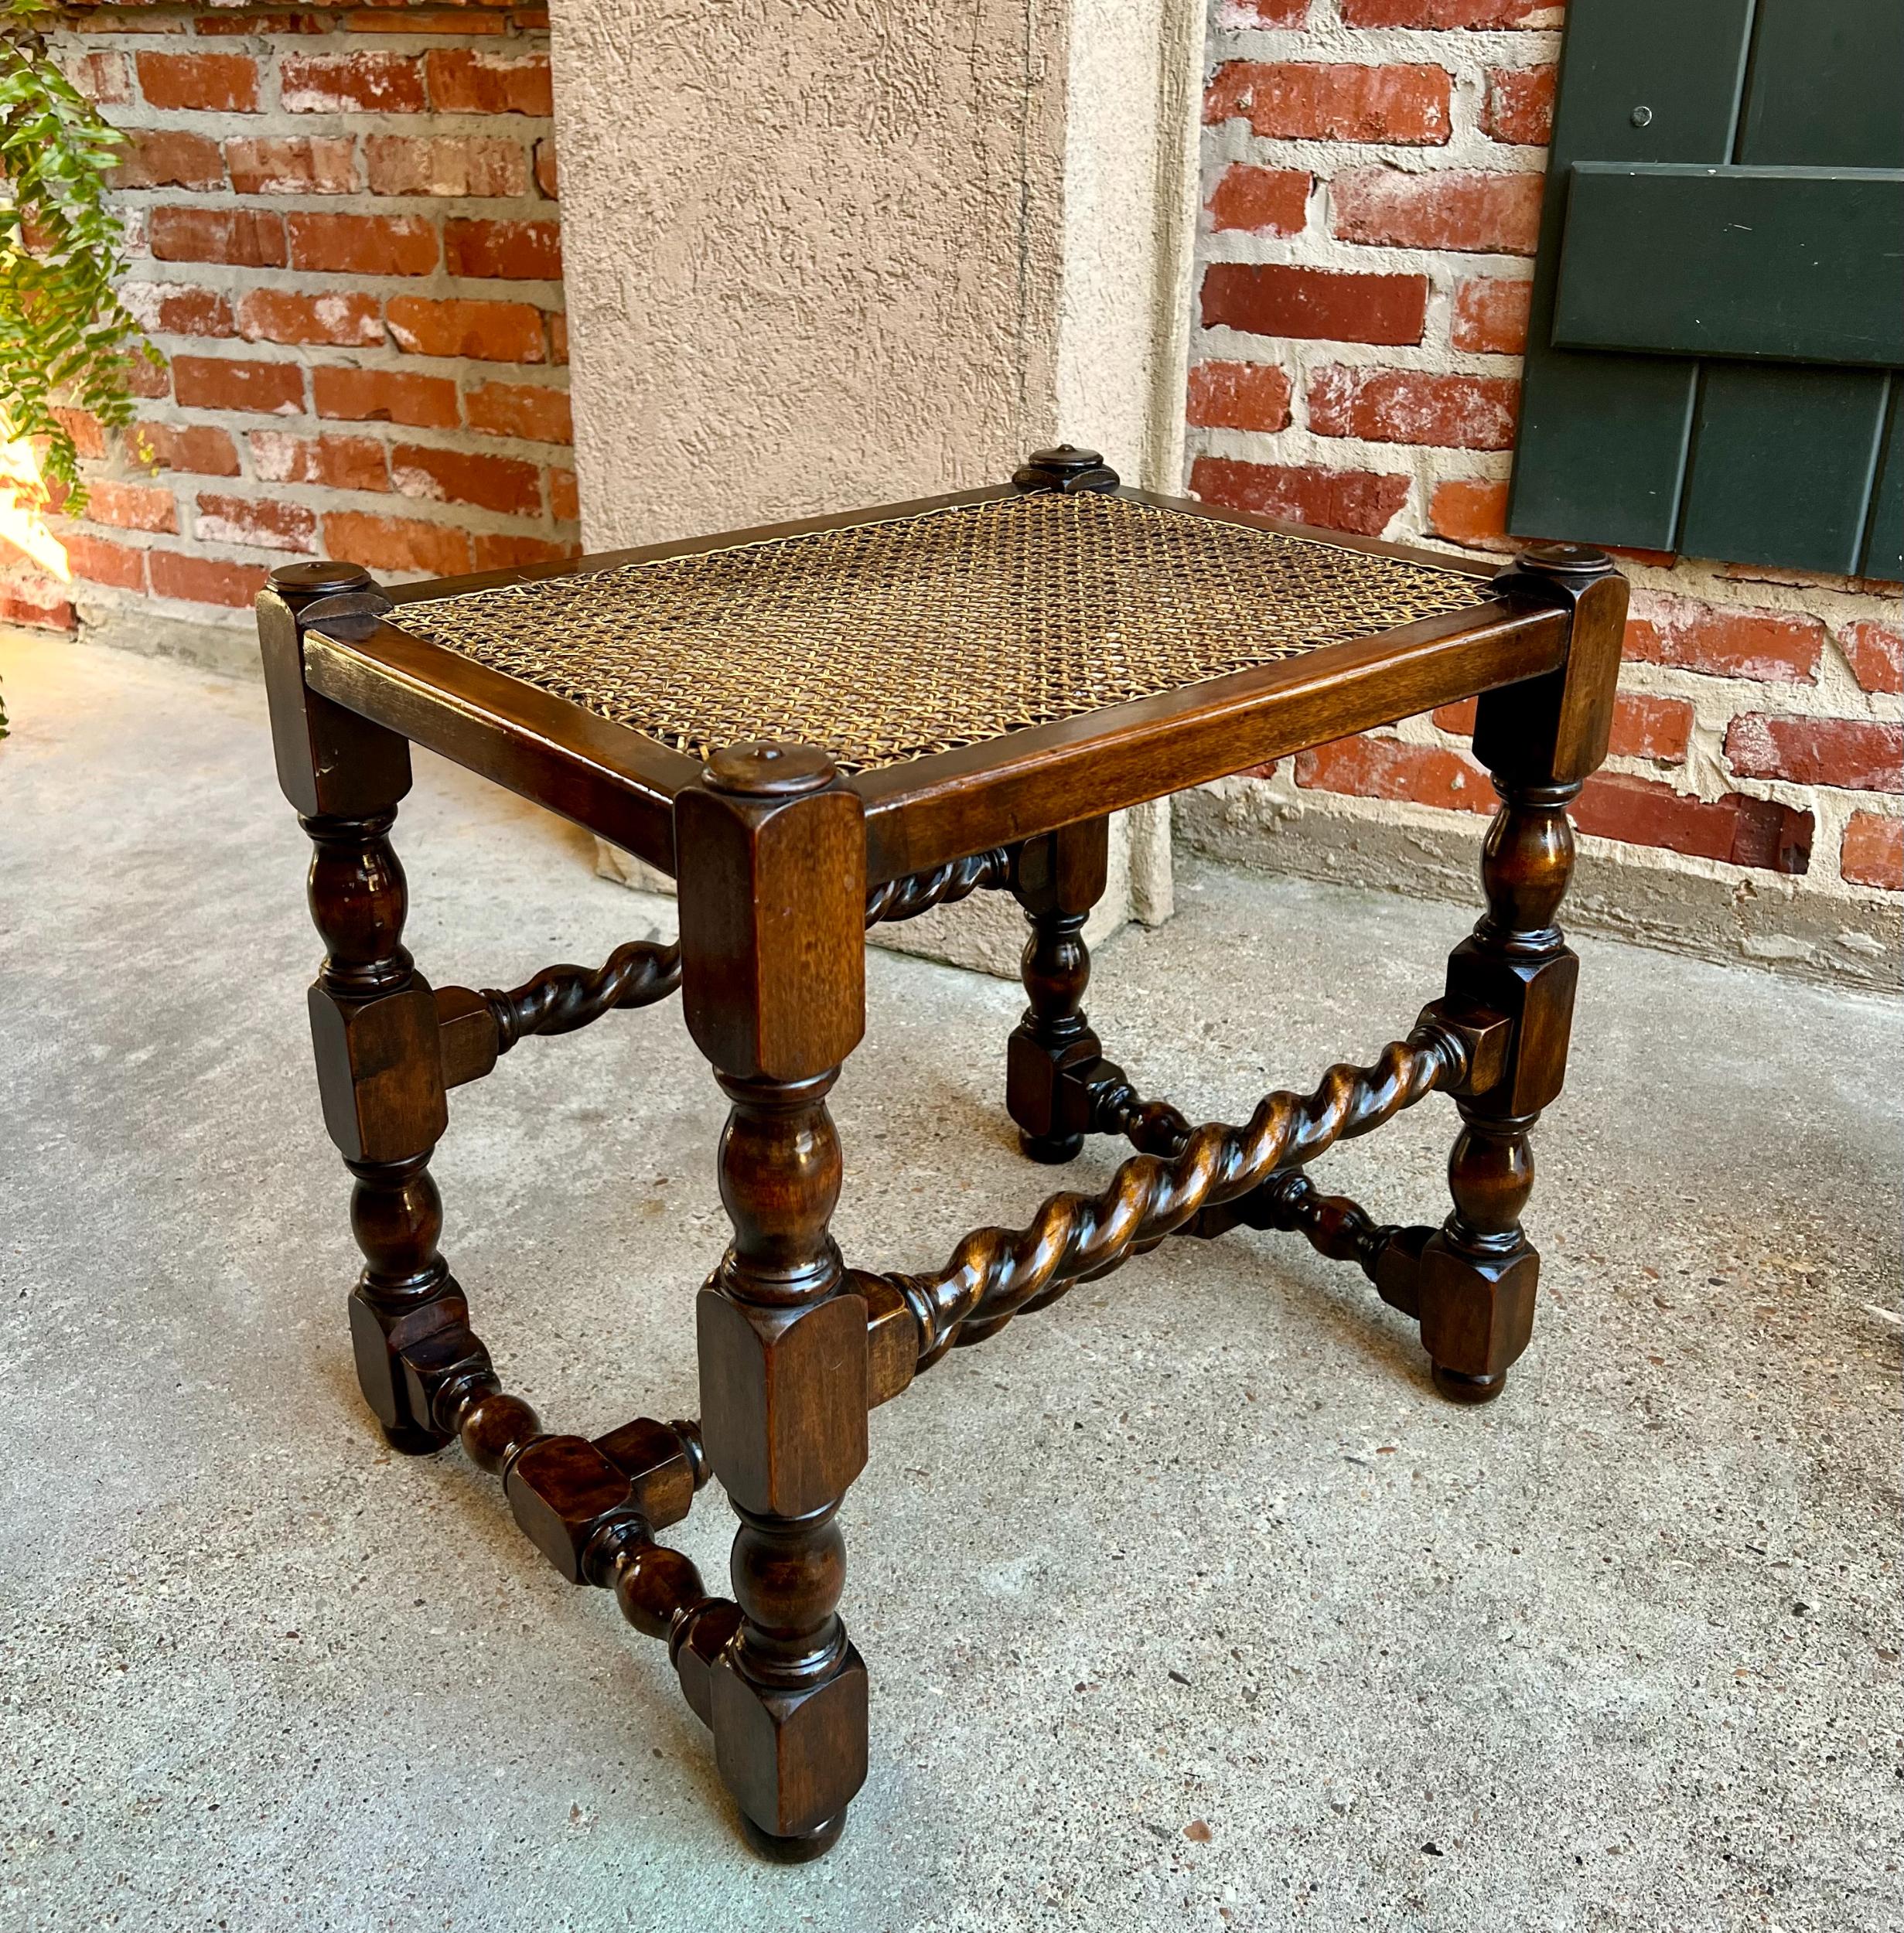 Antique English oak barley twist bench stool jacobean w cane top.

Direct from England, a wonderful antique English oak stool or bench.
Hand turned barley twist legs are joined by matching barley twist stretchers to the front and back, with turned